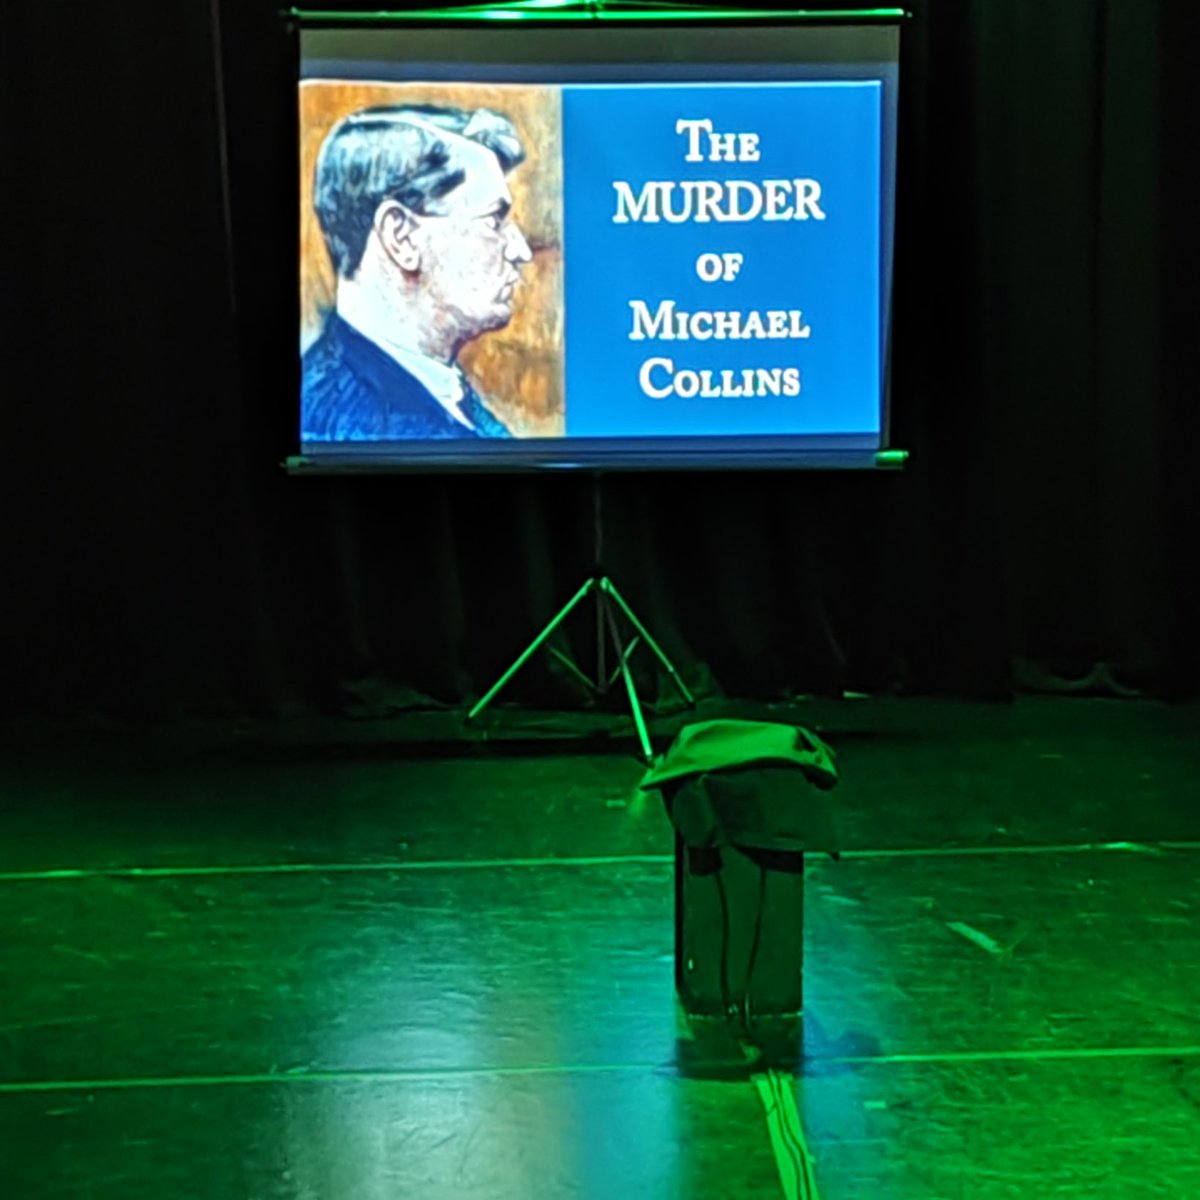 Last time I saw this show was on de telly during lockdown ... so very looking forward to @paddycullivan telling the story in real life in @TownHallCavan tonight